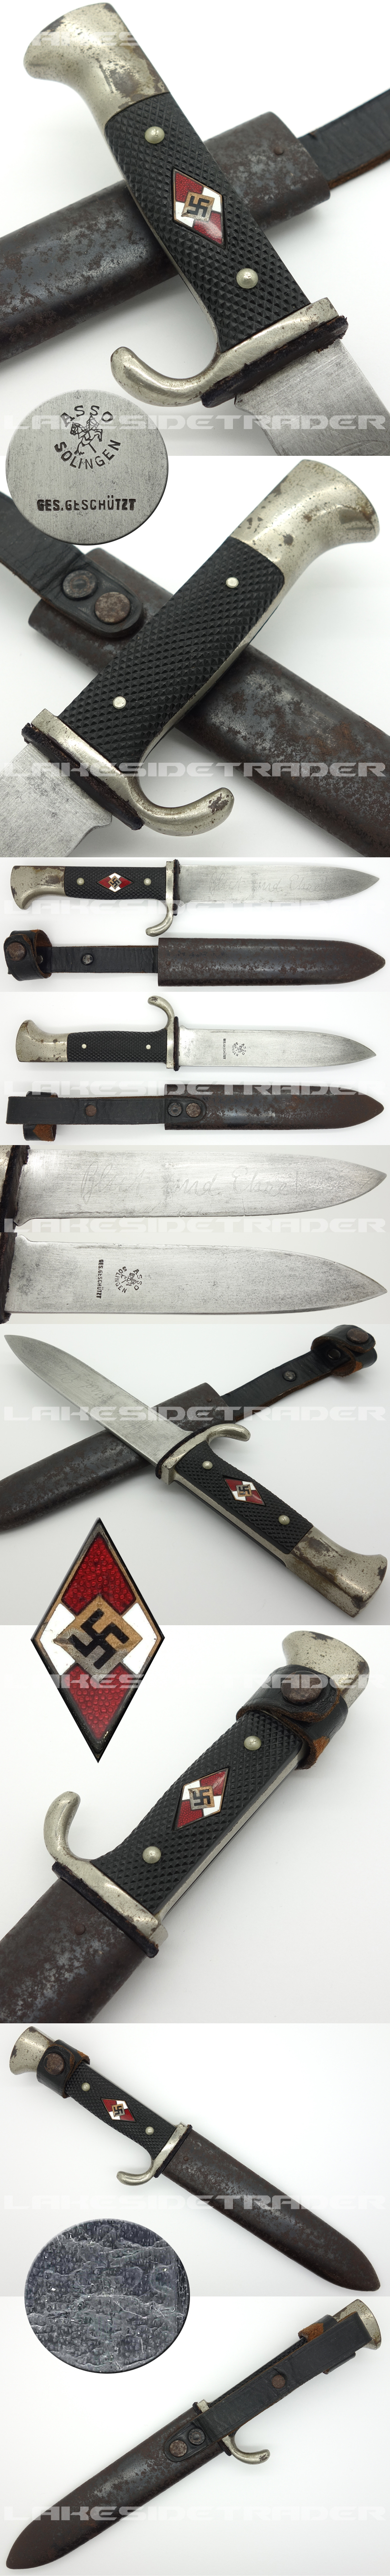 Early Hitler Youth Knife by ASSO